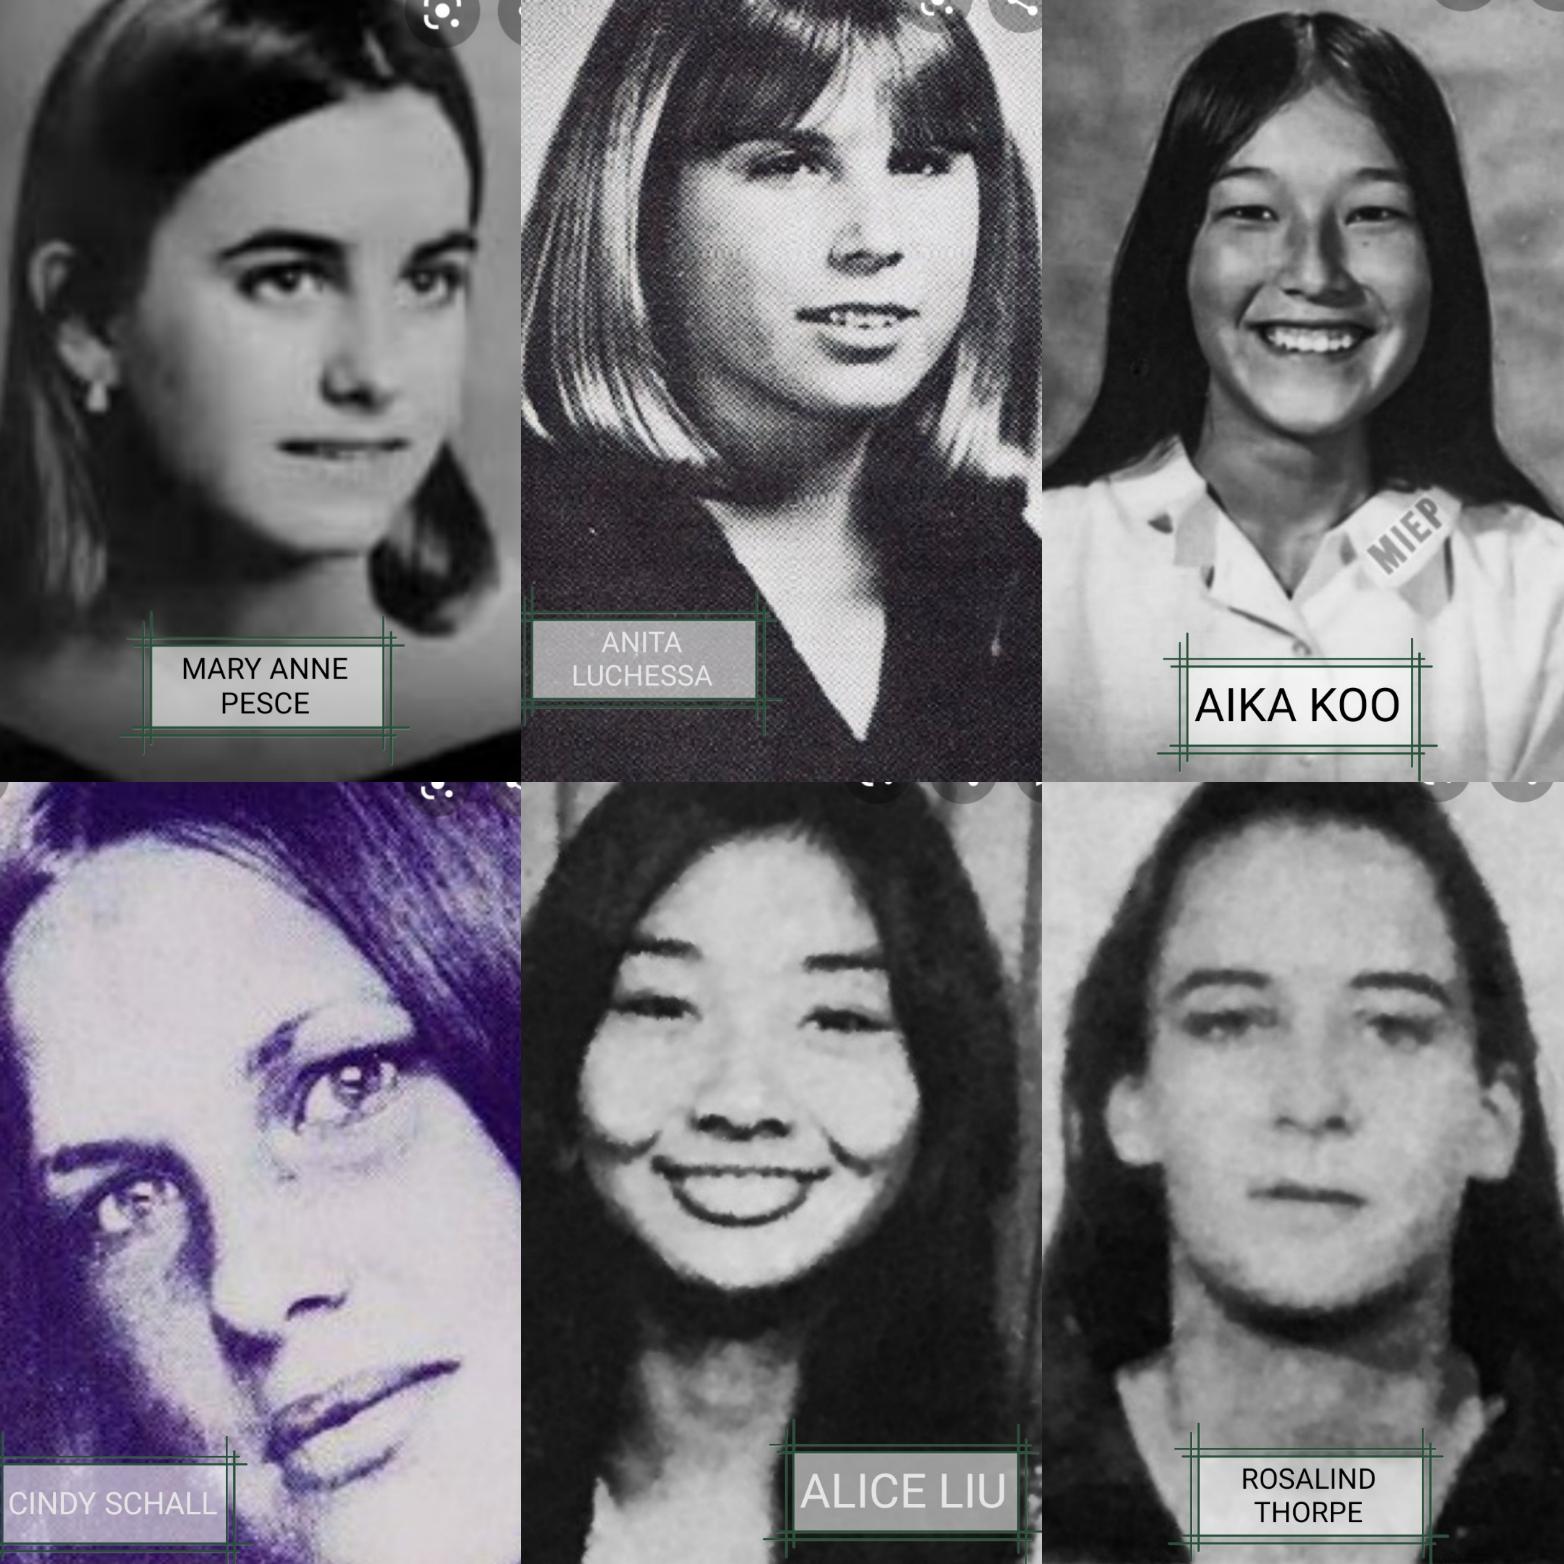 6 innocent young girls who couldn’t grow old because Ed Kemper chose to kidnap them, kill them, rape their corpses and decapitate their bodies